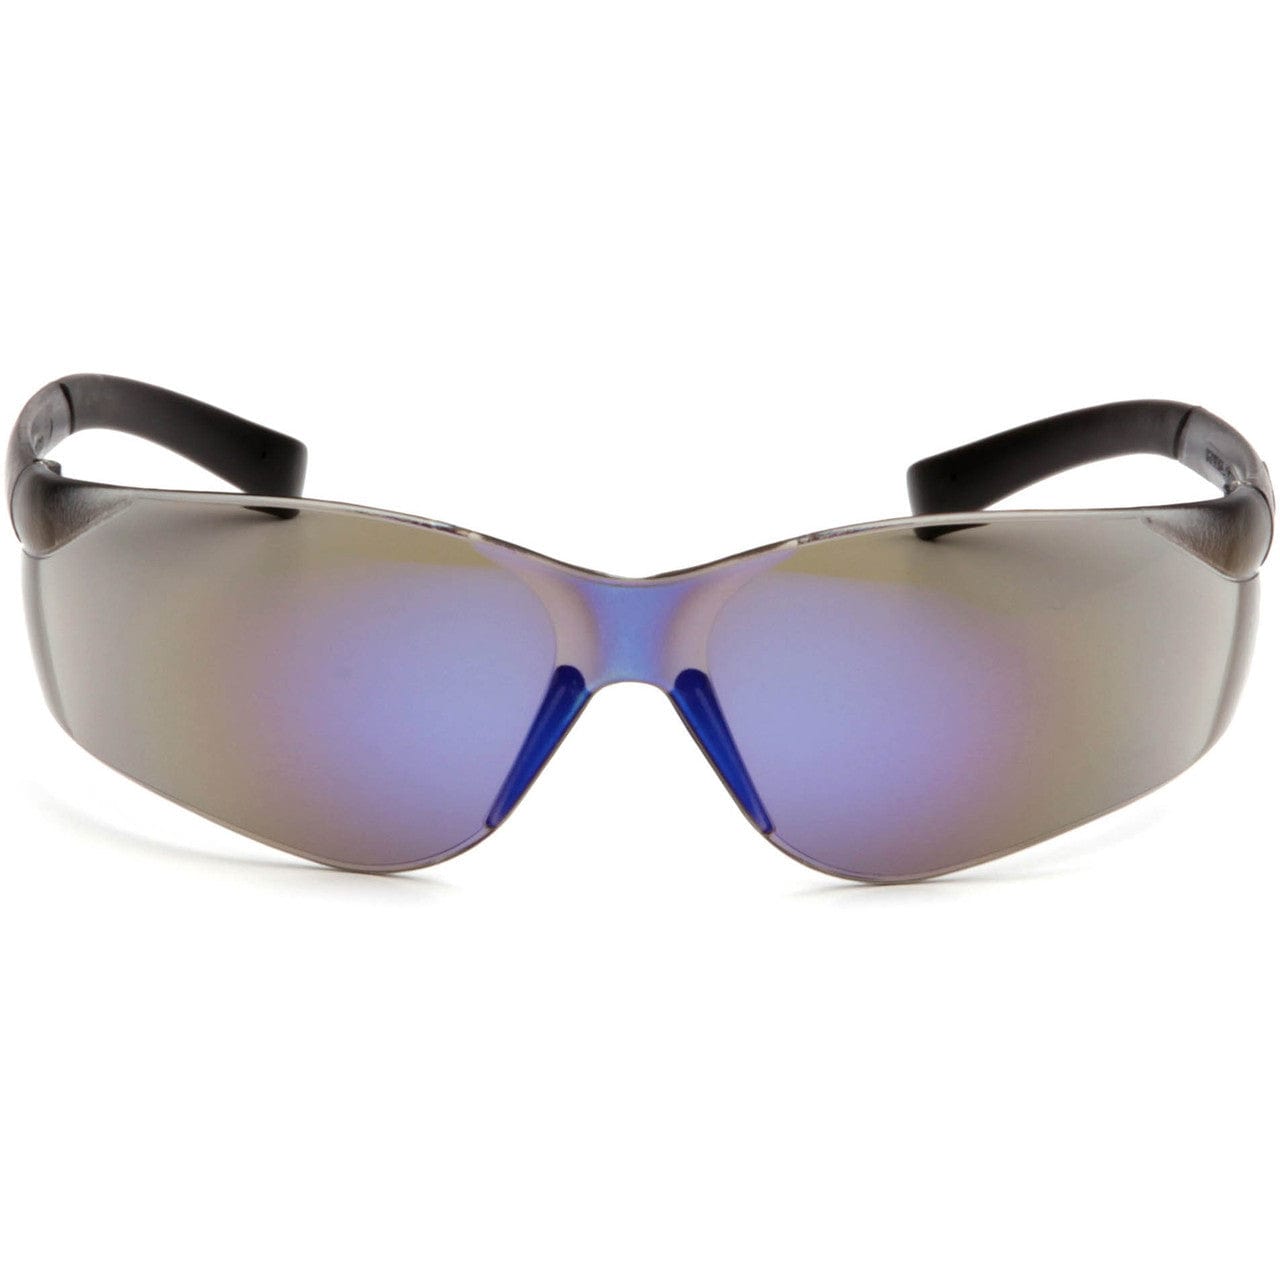 Pyramex Mini Ztek Safety Glasses with Blue Mirror Lens S2575SN Front View